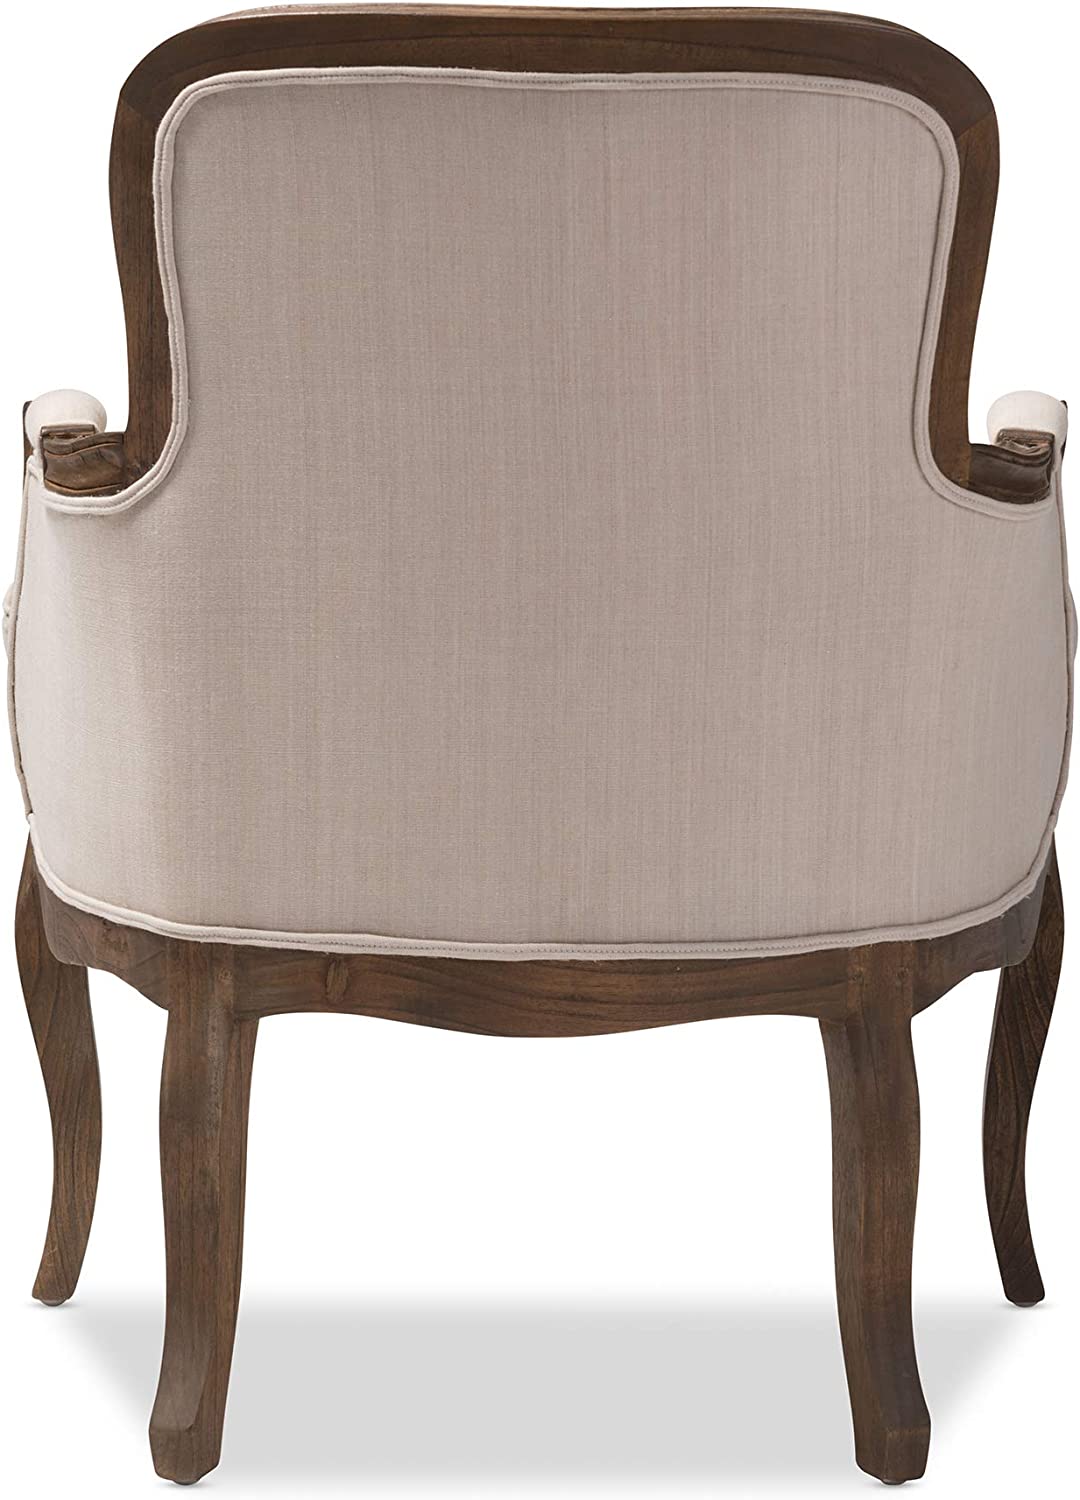 Baxton Studio Napoleon Traditional French Accent Chair, Ash